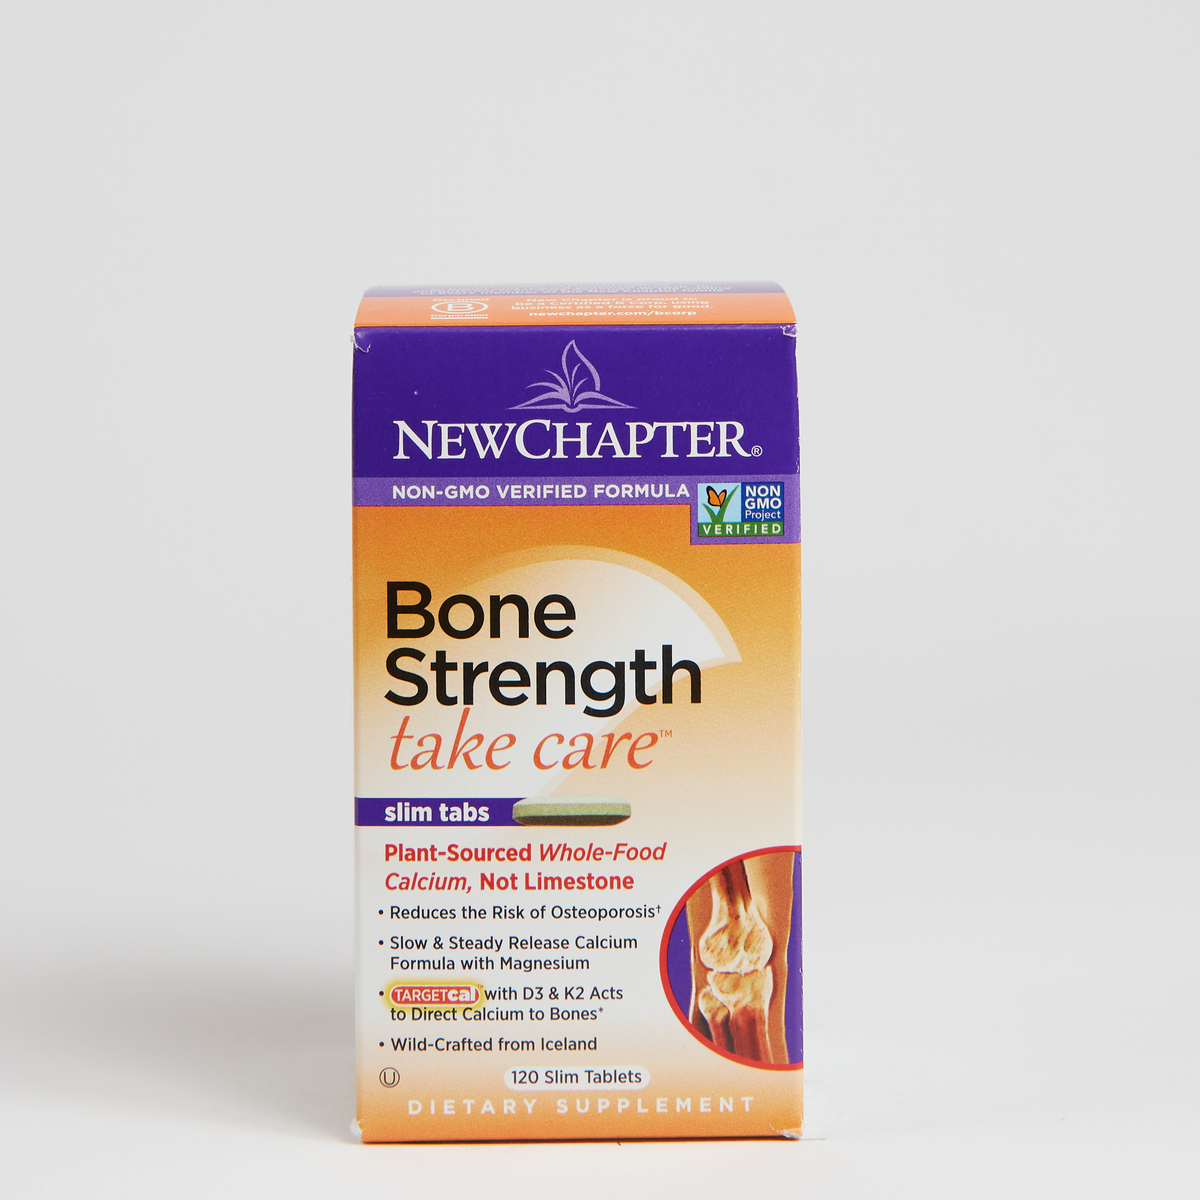 New Chapter Bone Strength Take Care - Slim Tablets - 120 Count